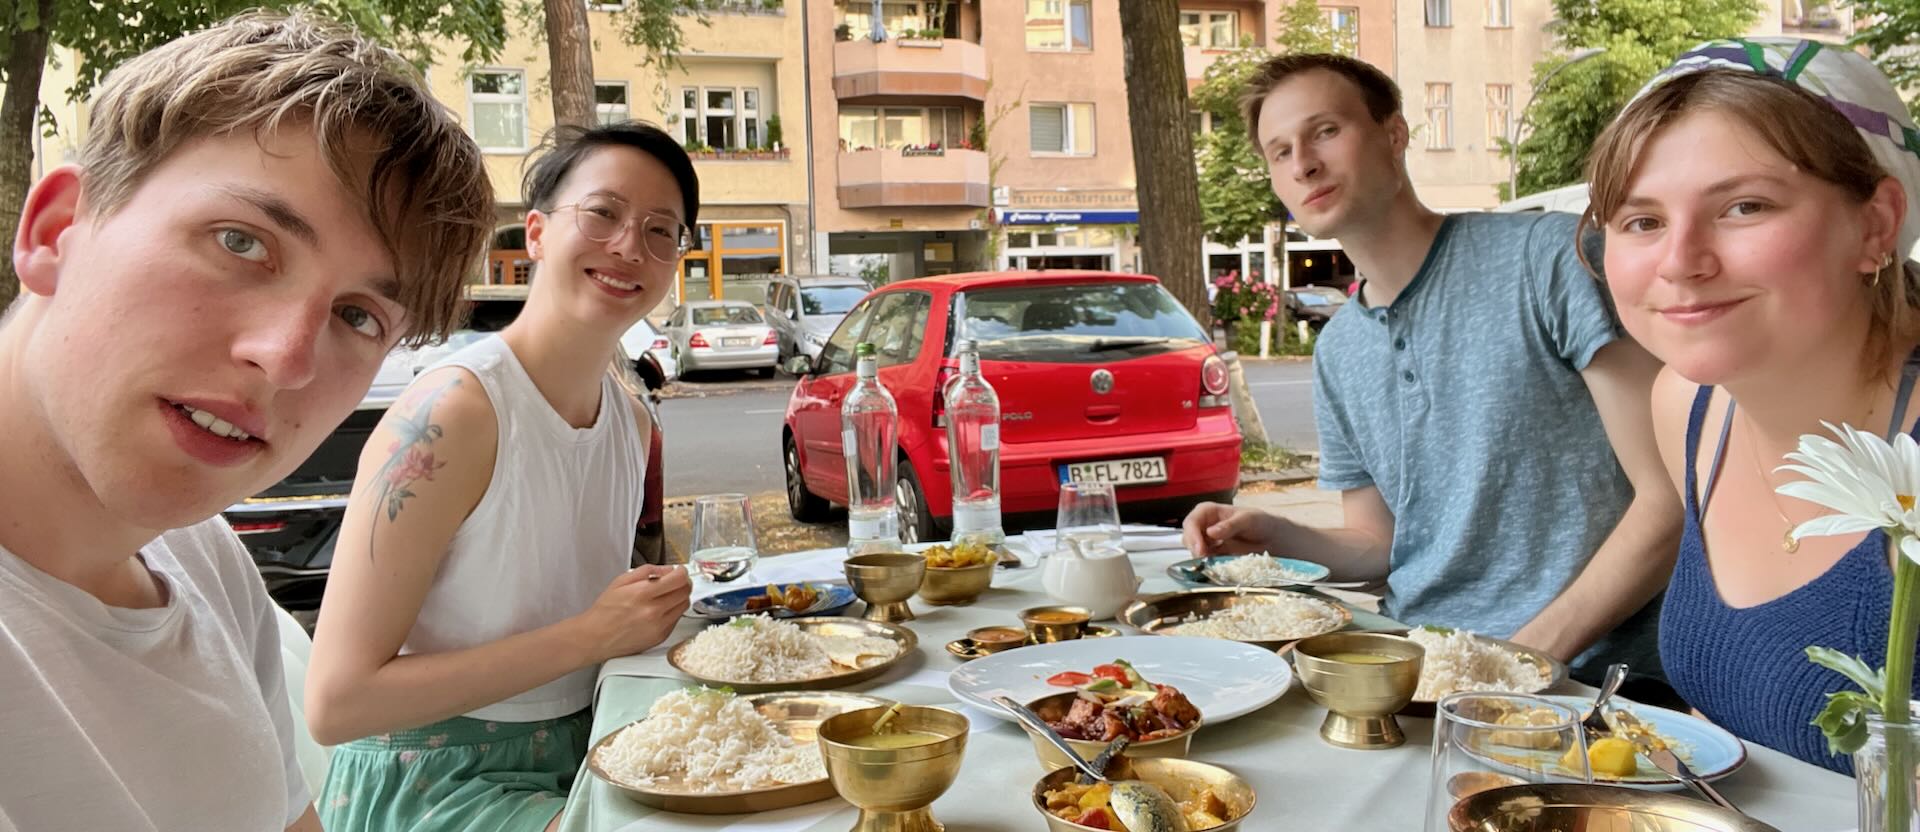 This Nepalese place in Charlottenburg was seriously good. Unfortunately I didn't end up taking any photos of Friedrichshein!